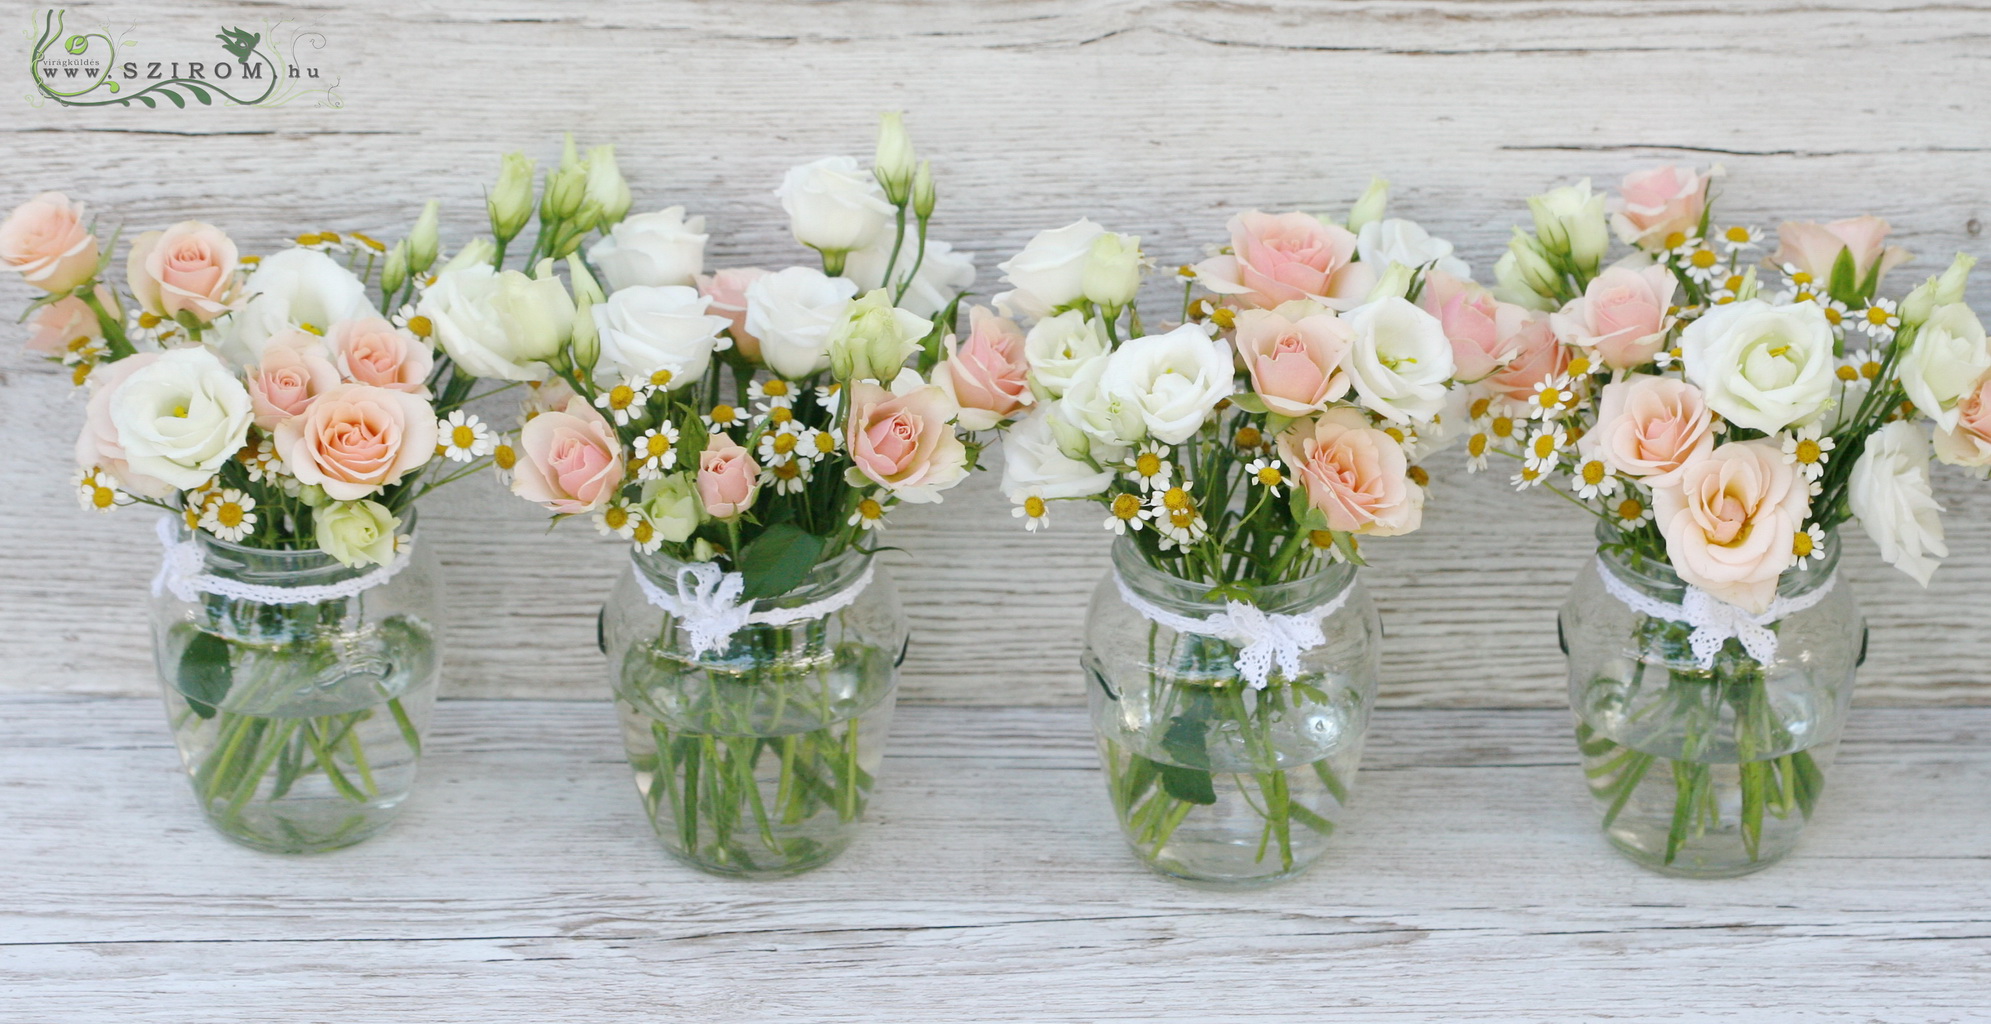 flower delivery Budapest - Centerpiece 1pc (rose, lizantus, camomile, white, peach), wedding